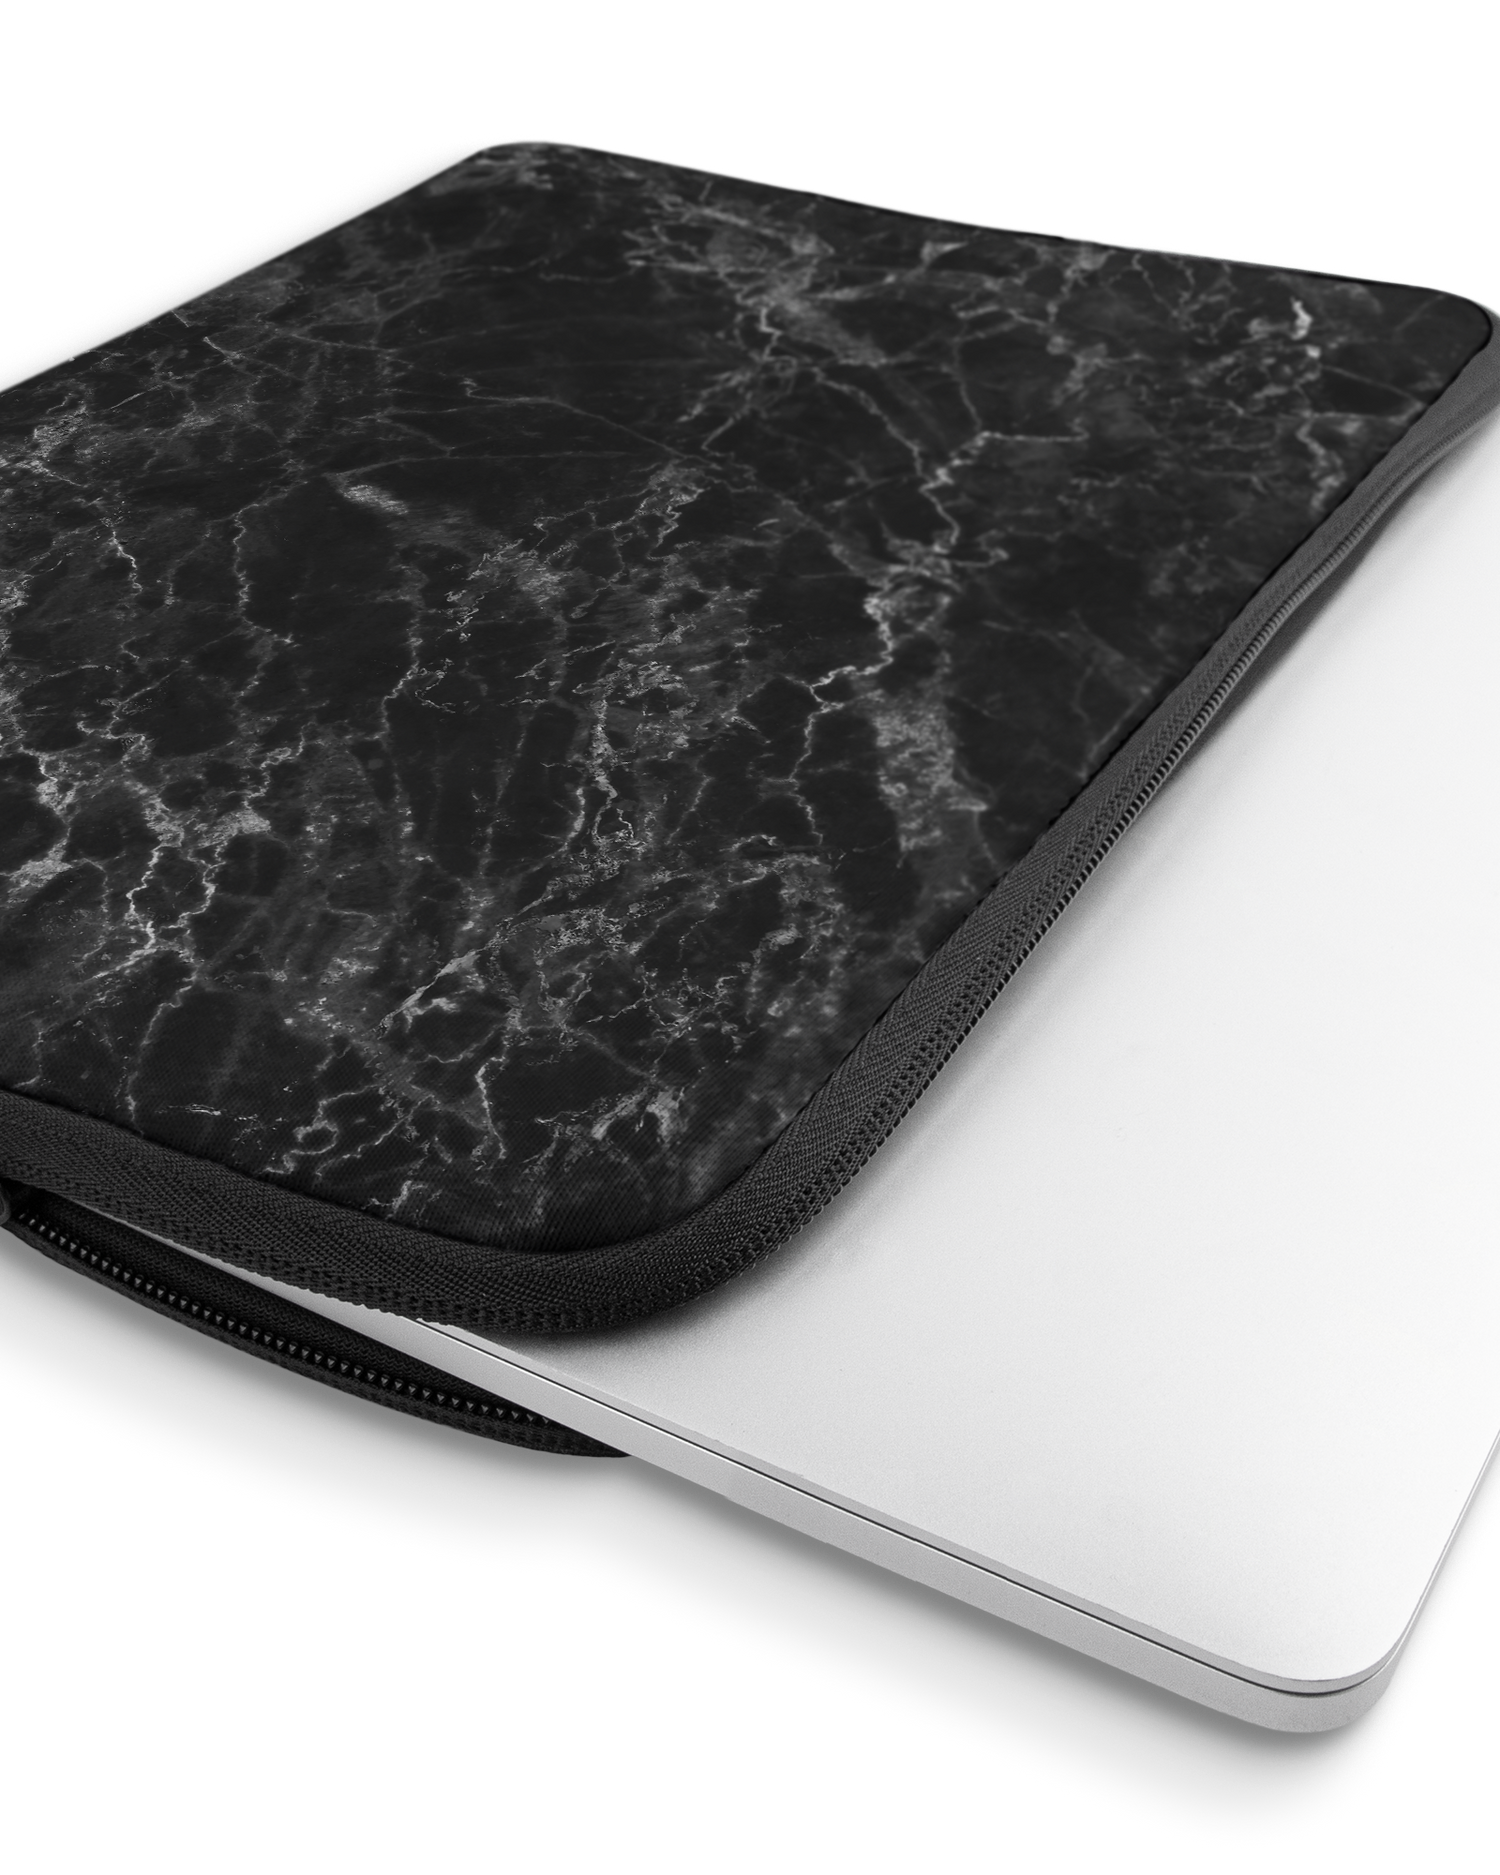 Midnight Marble Laptop Case 16 inch with device inside